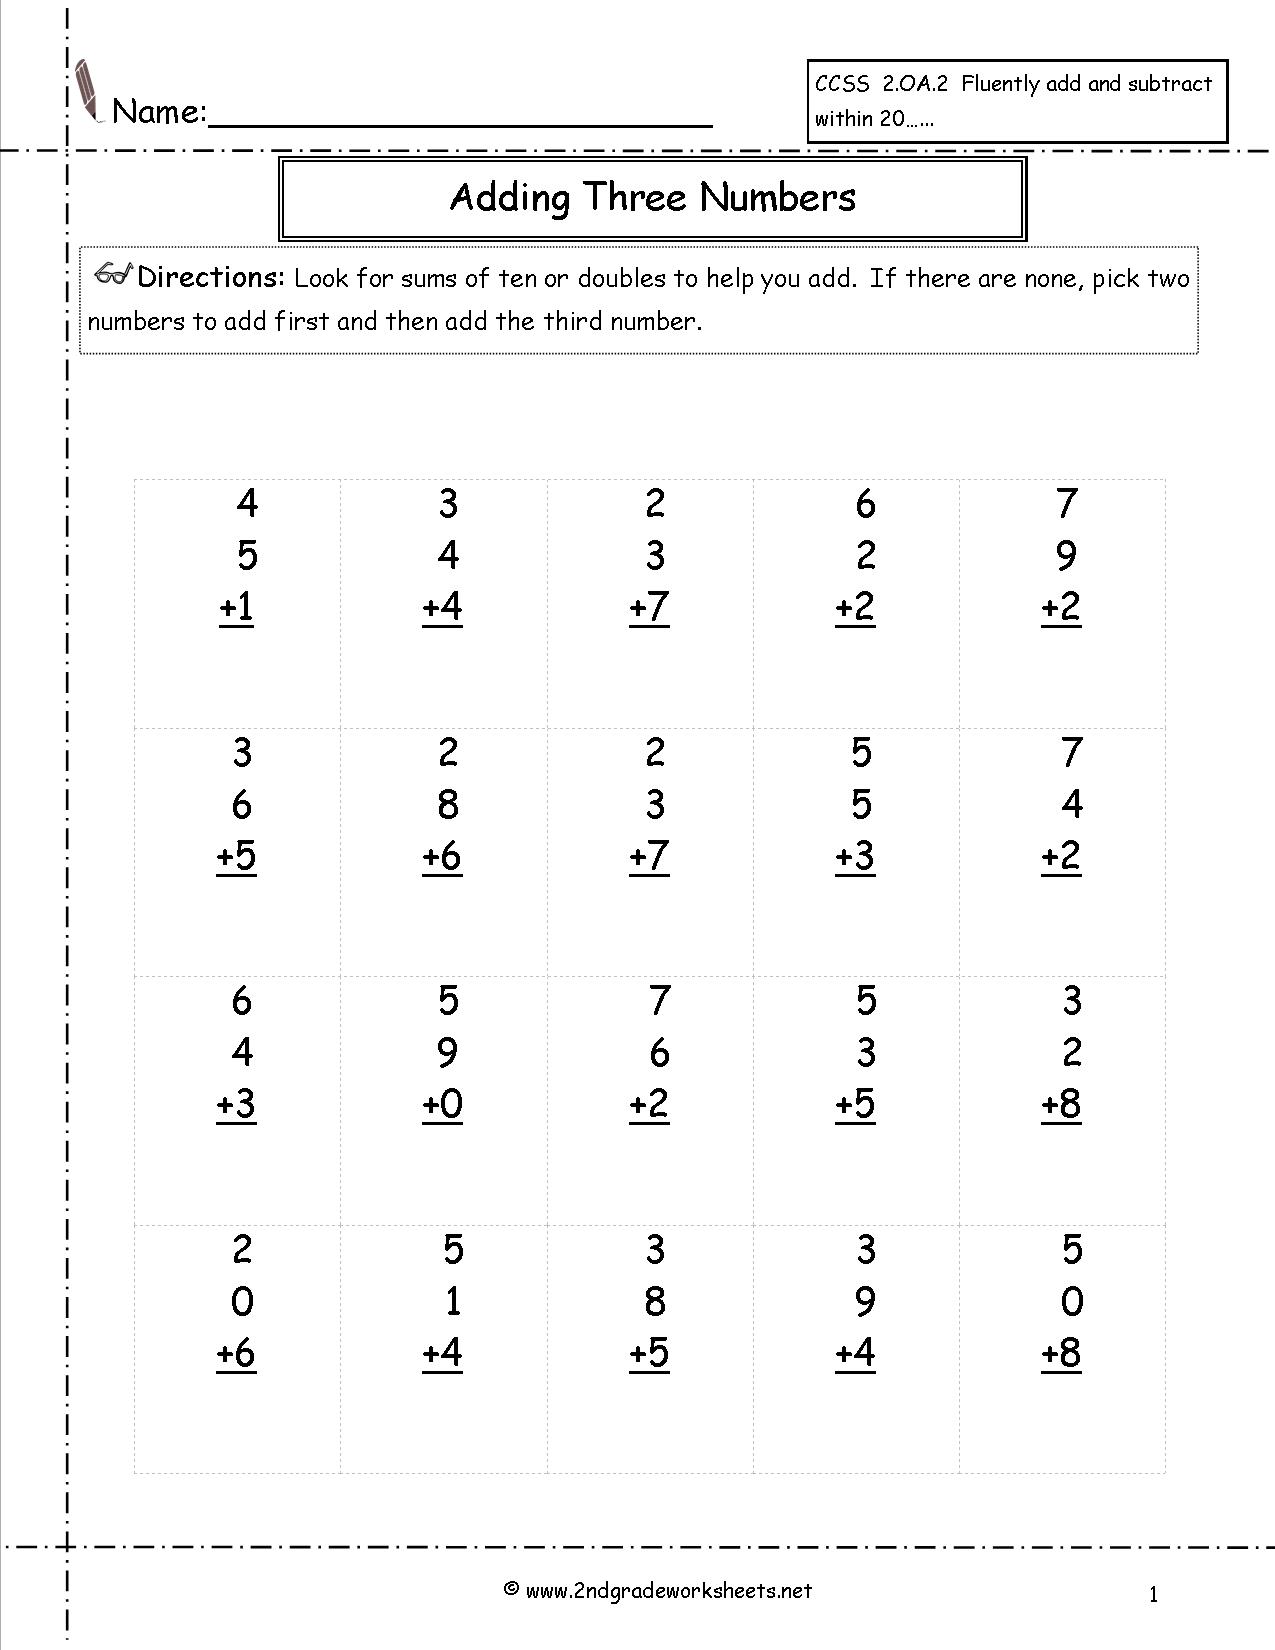 7 Best Images of Adding 3 Numbers Worksheets Printable - First Grade